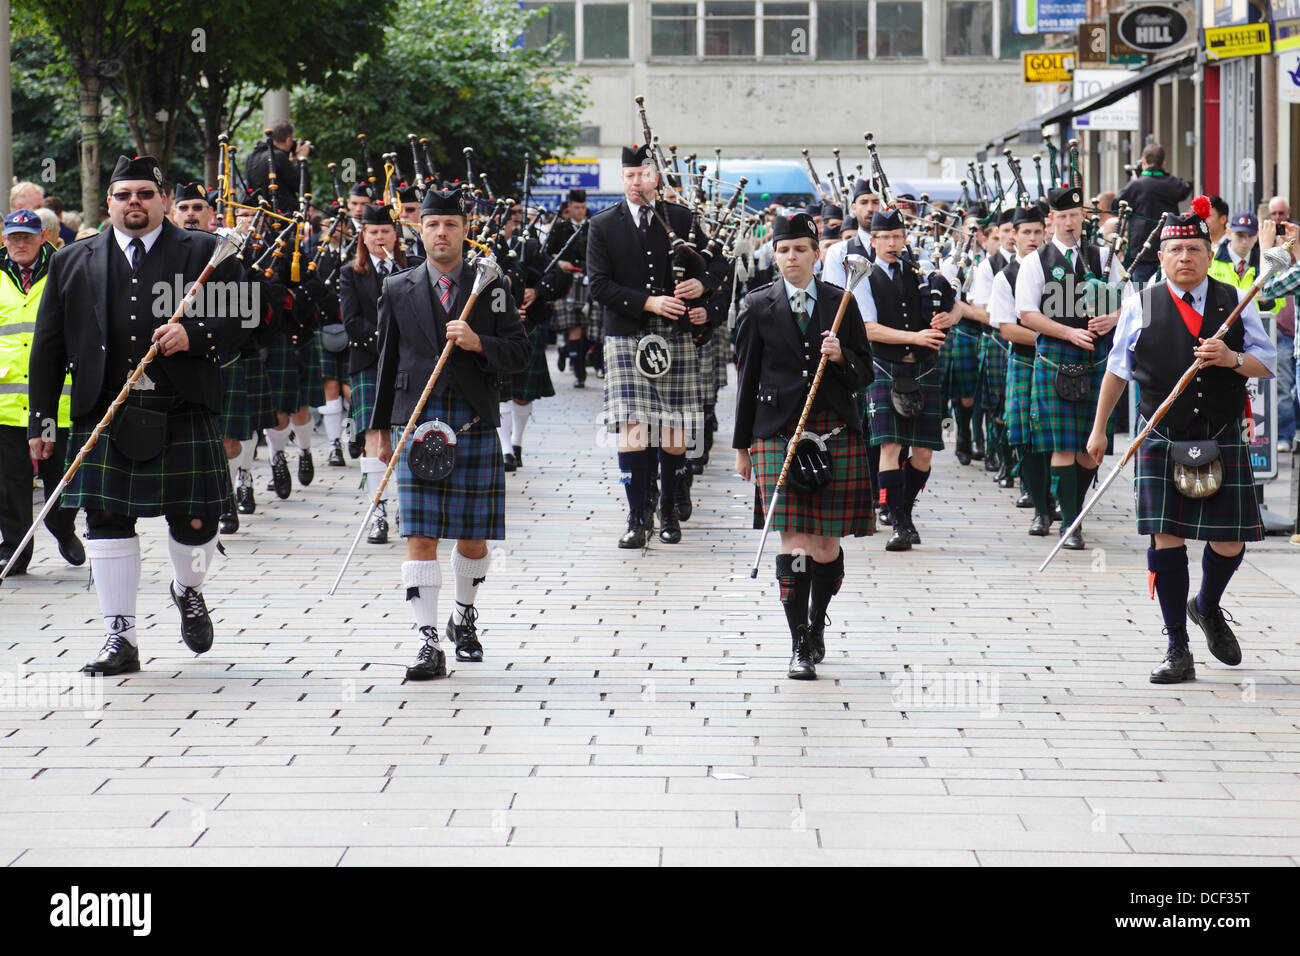 Saint Enoch Square, Glasgow, Scotland, UK, Friday, 16th August, 2013. Four Pipe Bands taking part in the traditional Beat The Retreat during the Piping Live! Festival Stock Photo